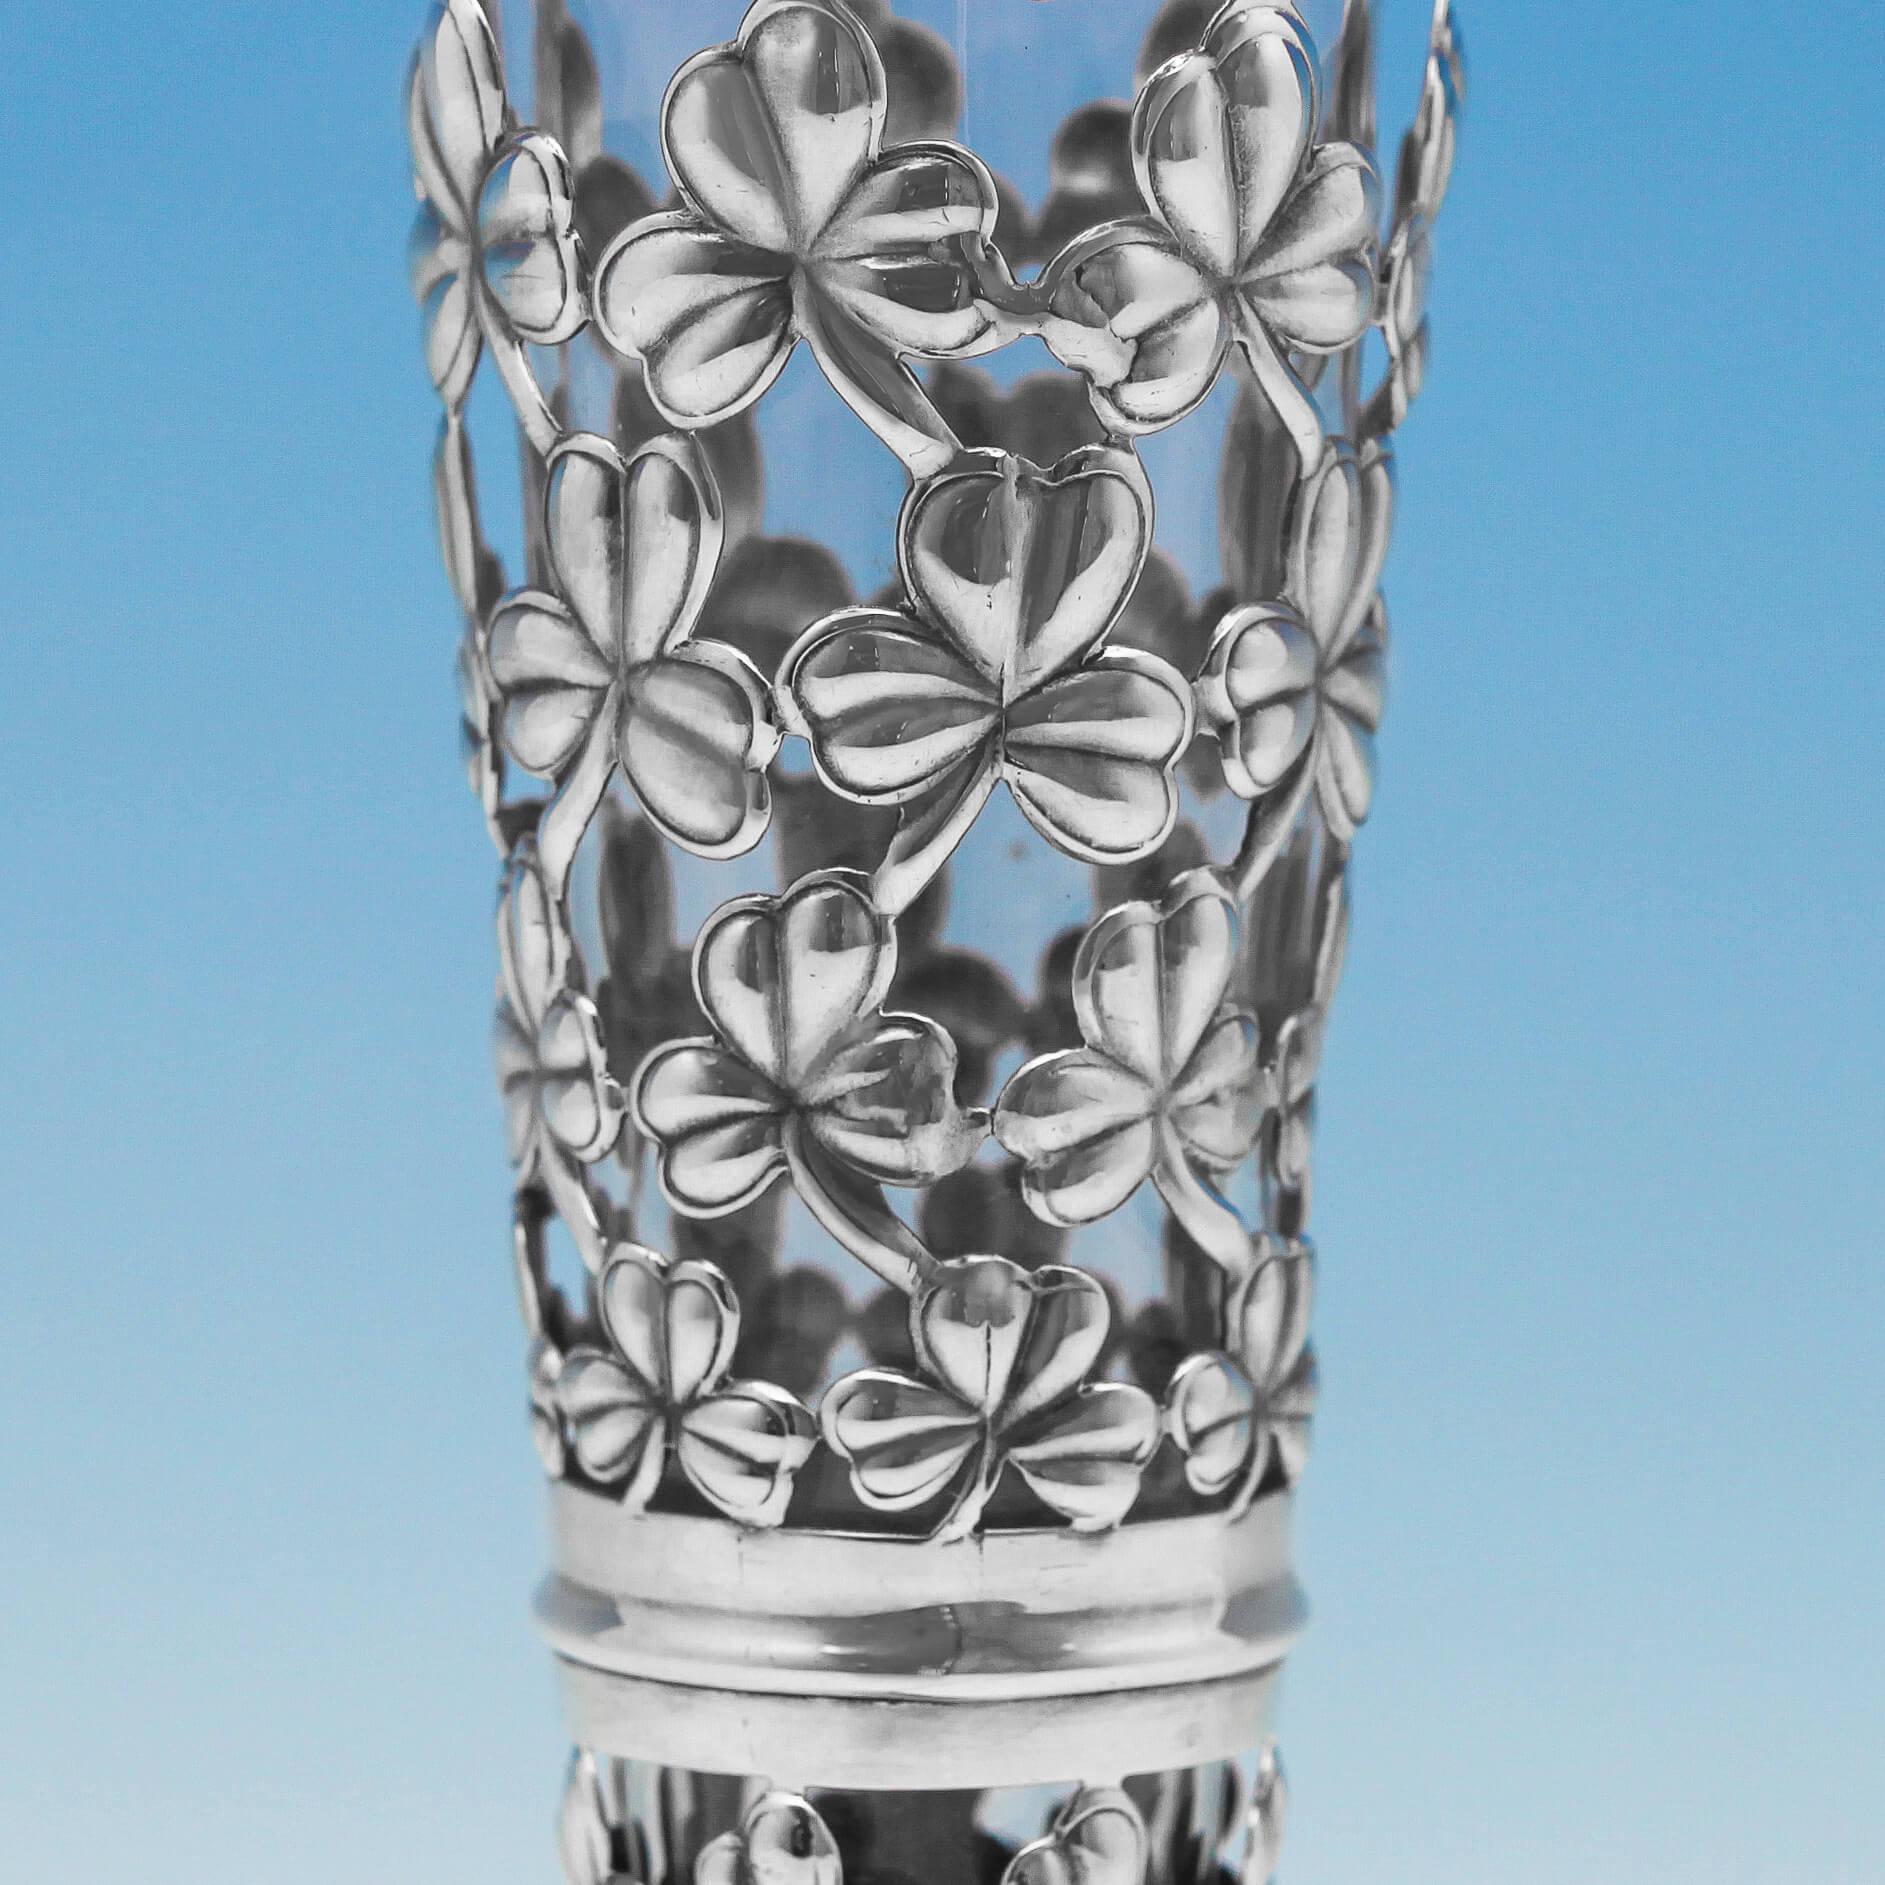 Hallmarked in Birmingham, 1905 by Martin & Hall, this delightful, Edwardian, Antique, Sterling Silver Vase, has pierced decoration to the body with a clover design, and a clear glass liner. The vase measures 9